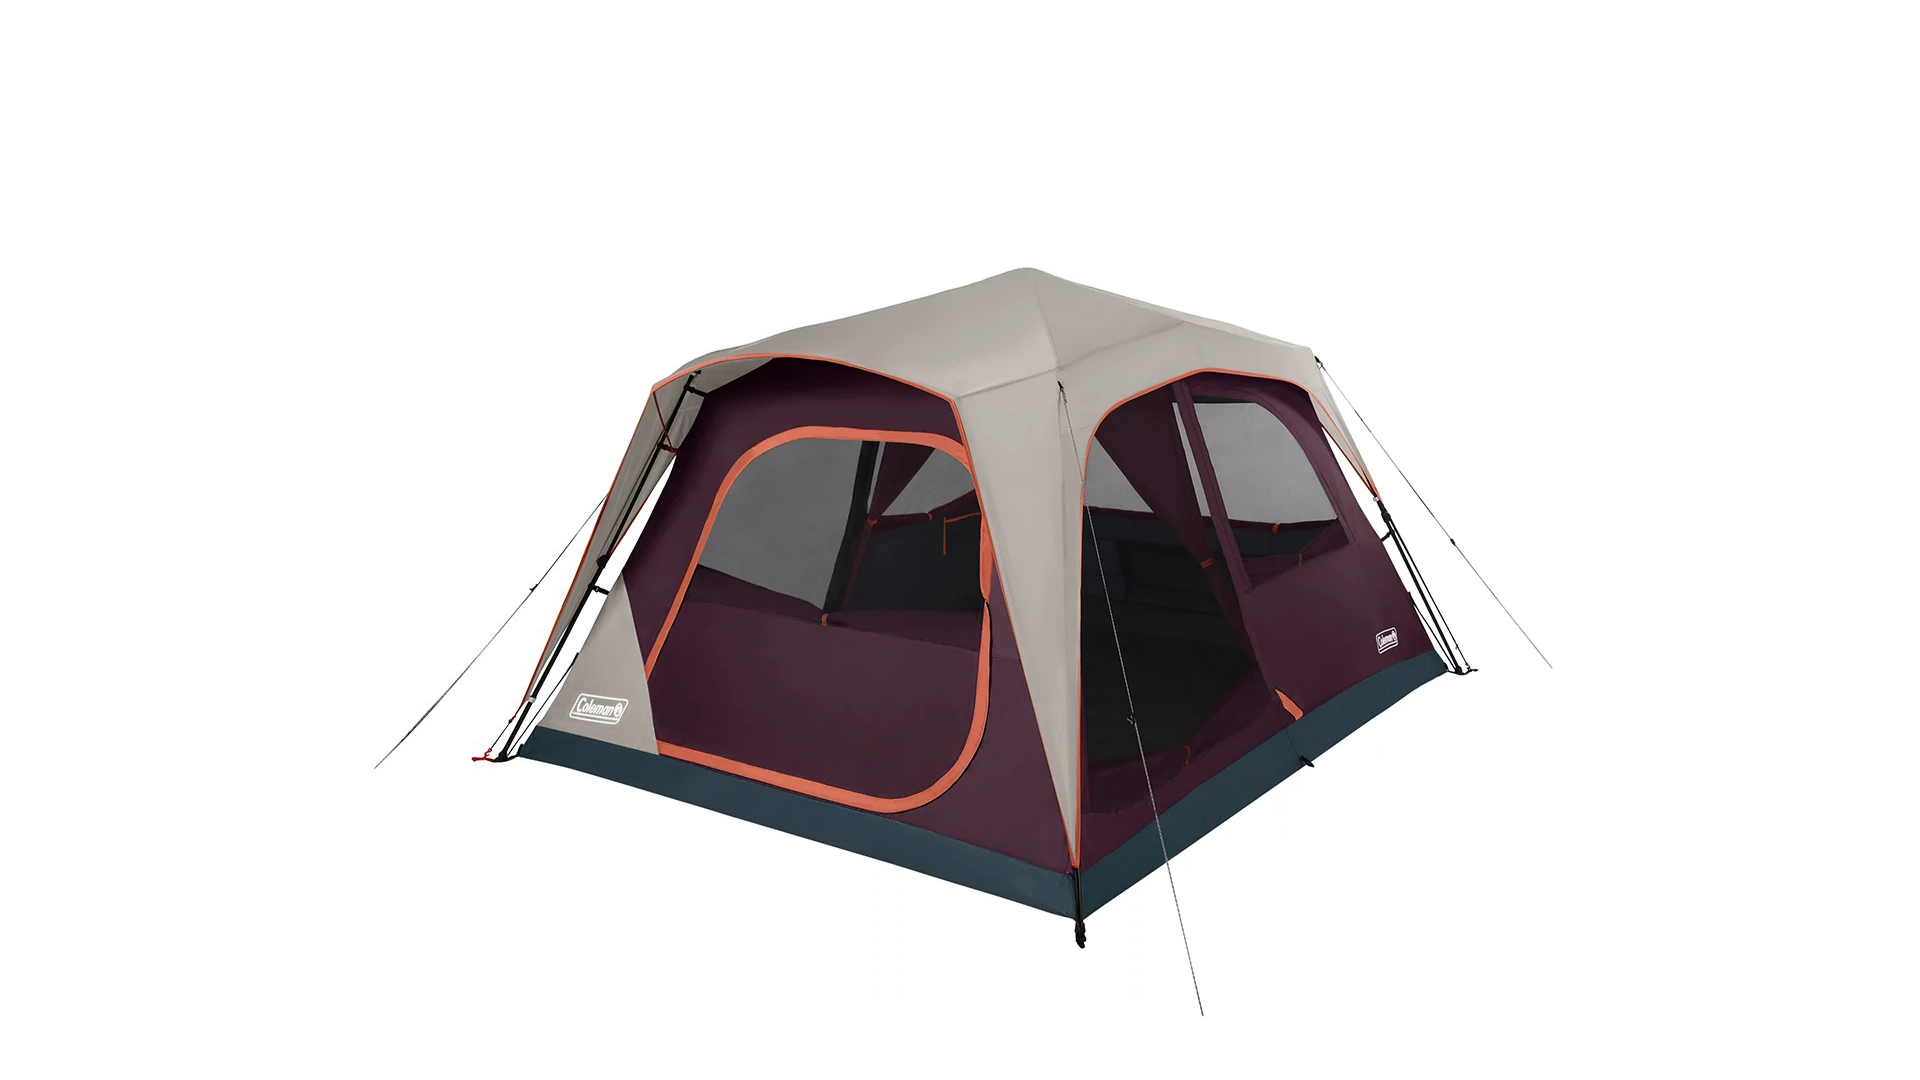 Skylodge™ 8-Person Instant Camping Tent, Blackberry - Black Sheep